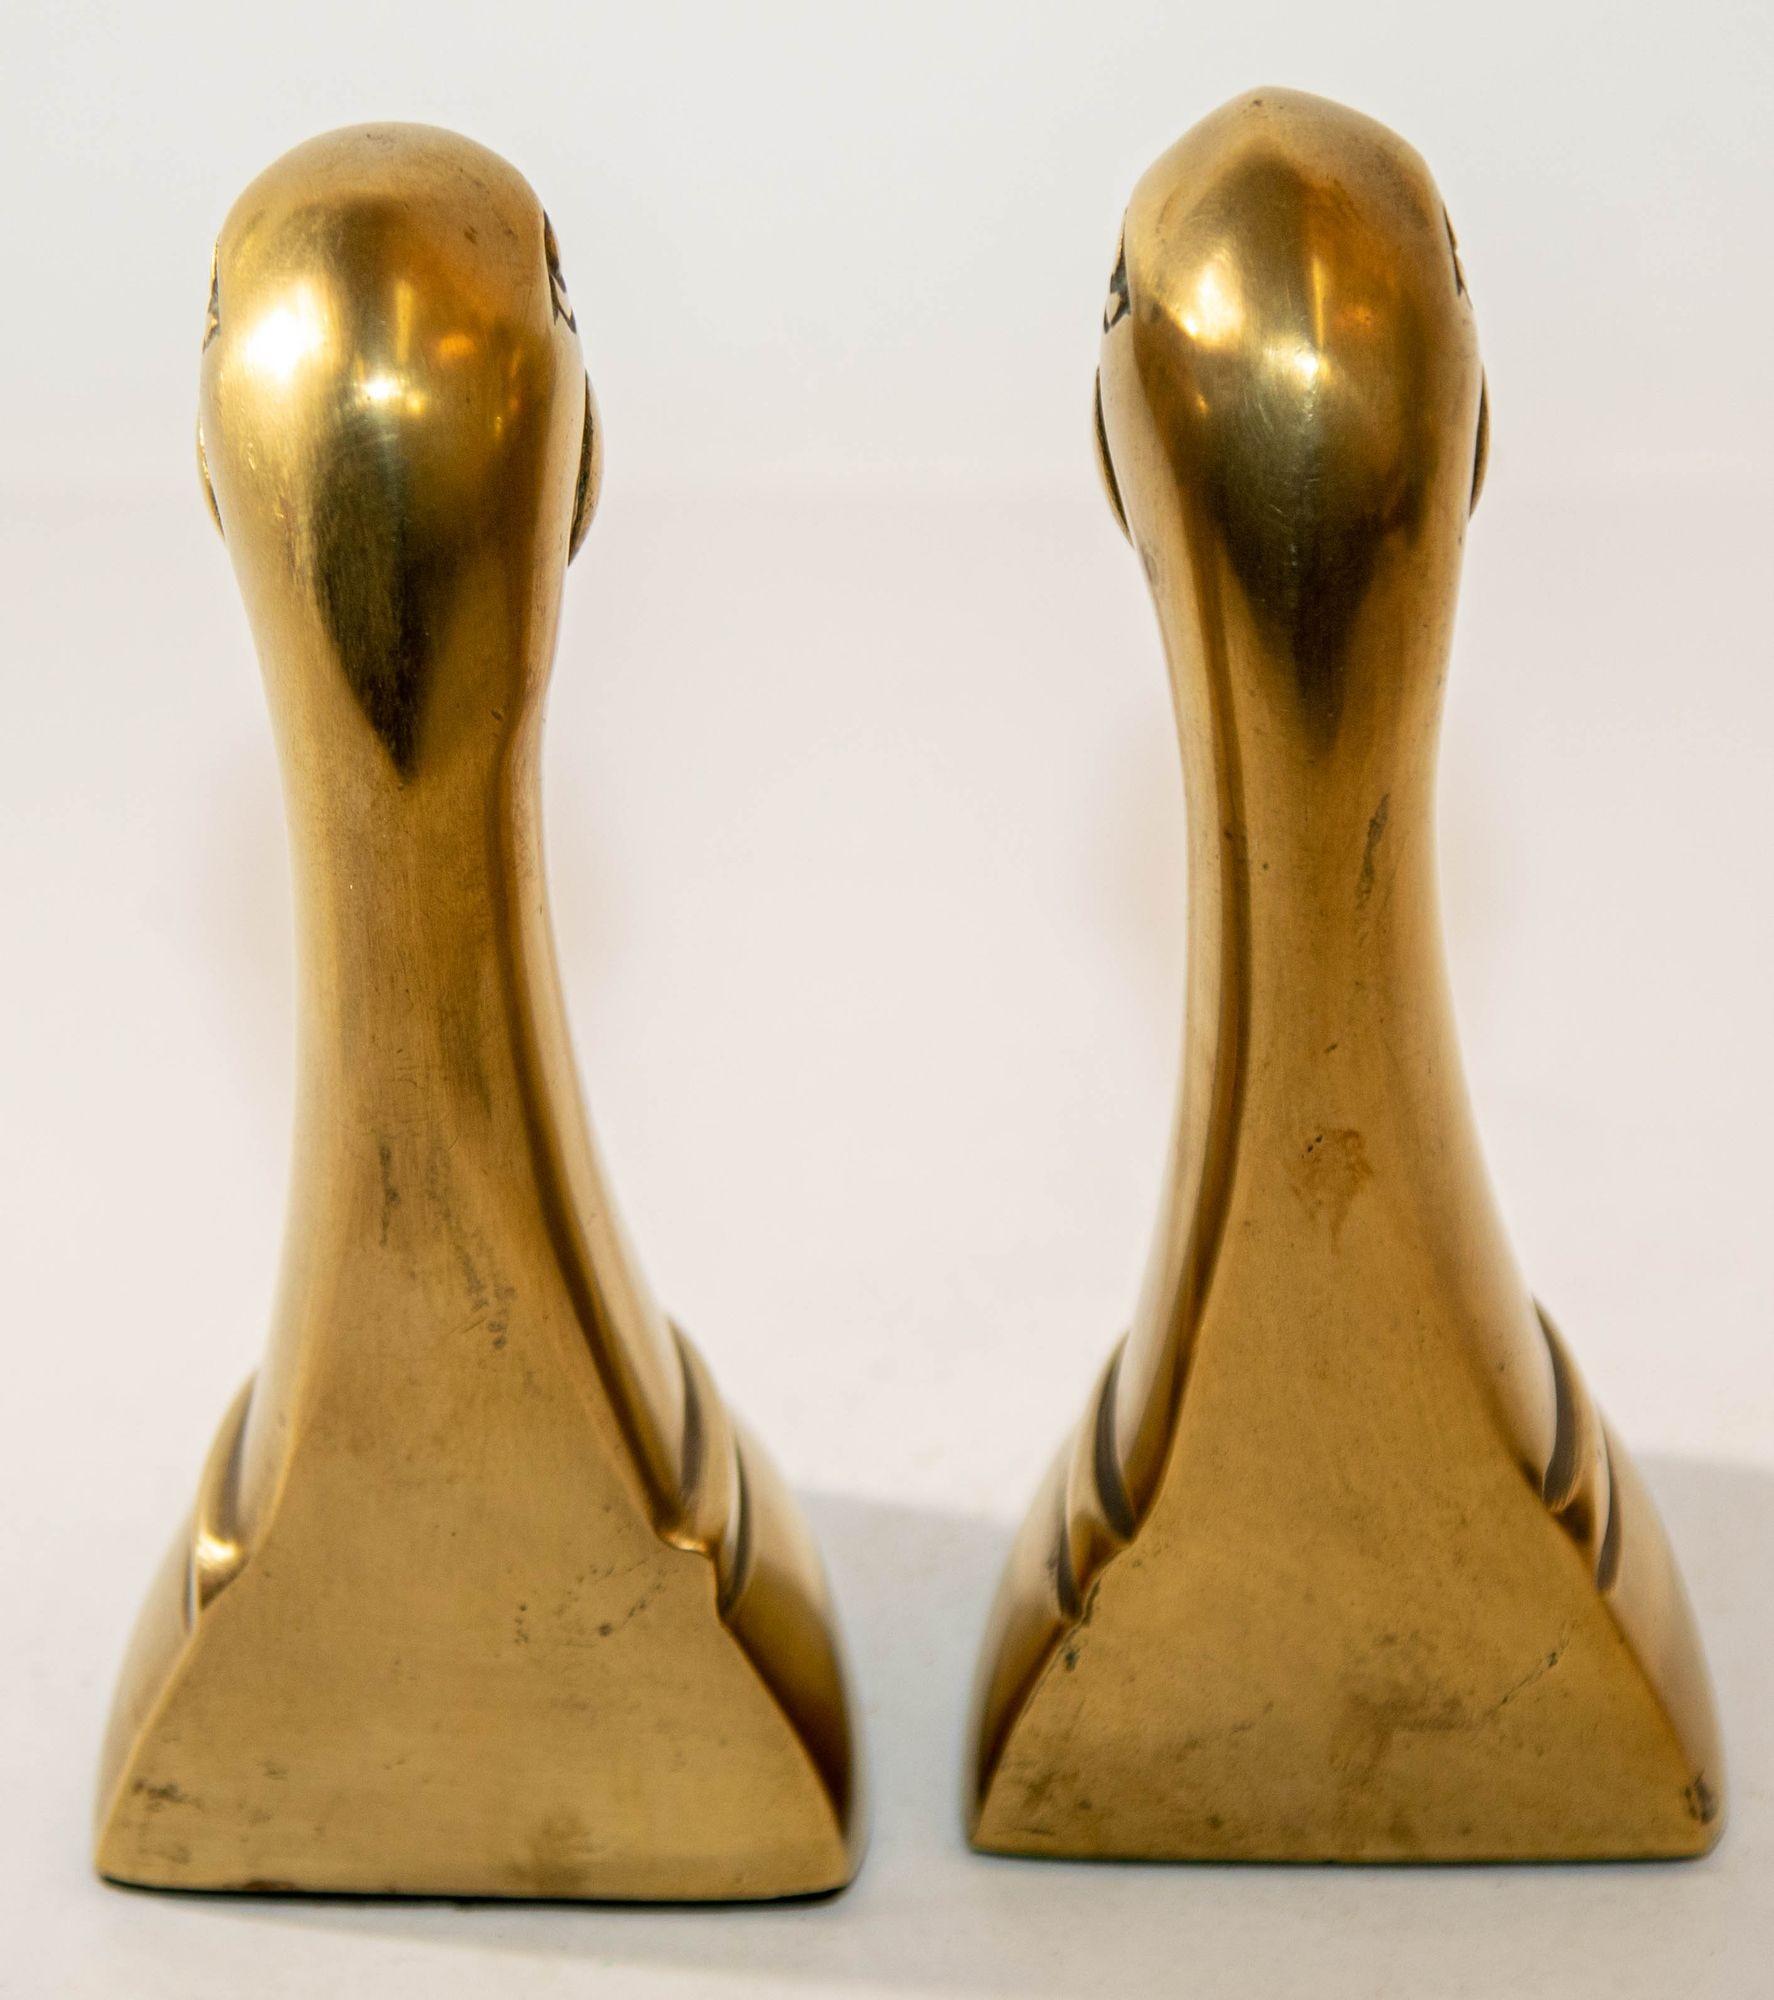 Cast Polished Solid Brass Mallard Duck Head Bookends Sarreid Style 1950's A Pair For Sale